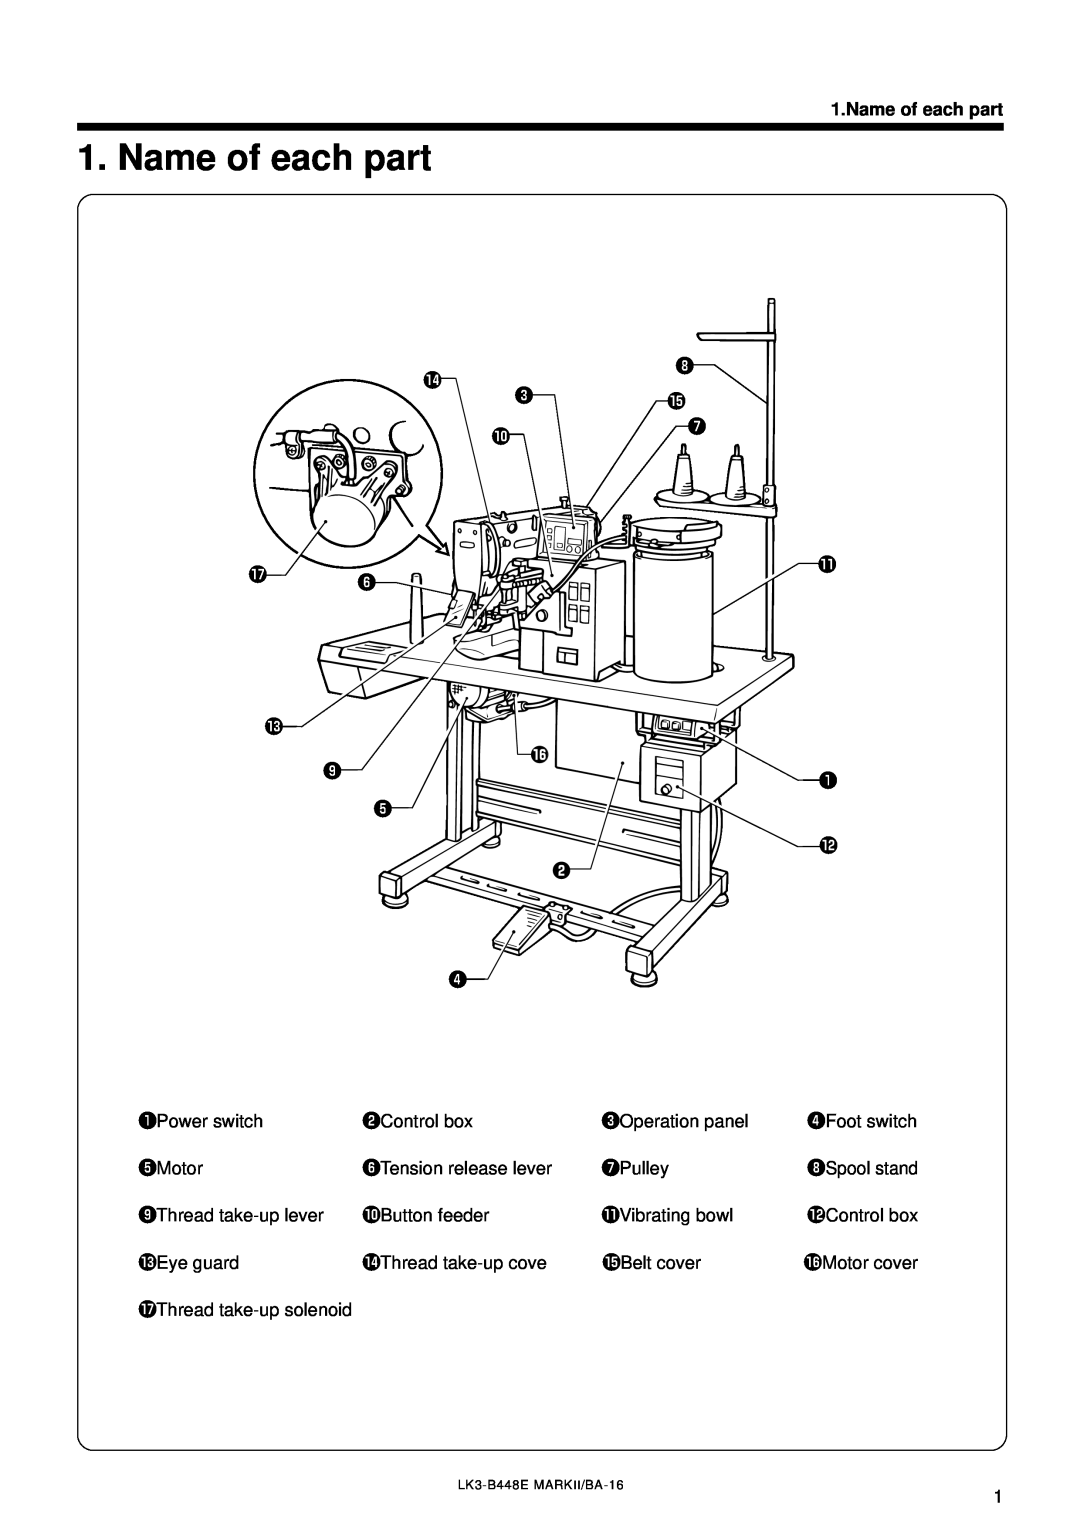 Brother LK3-B448E instruction manual Name of each part 